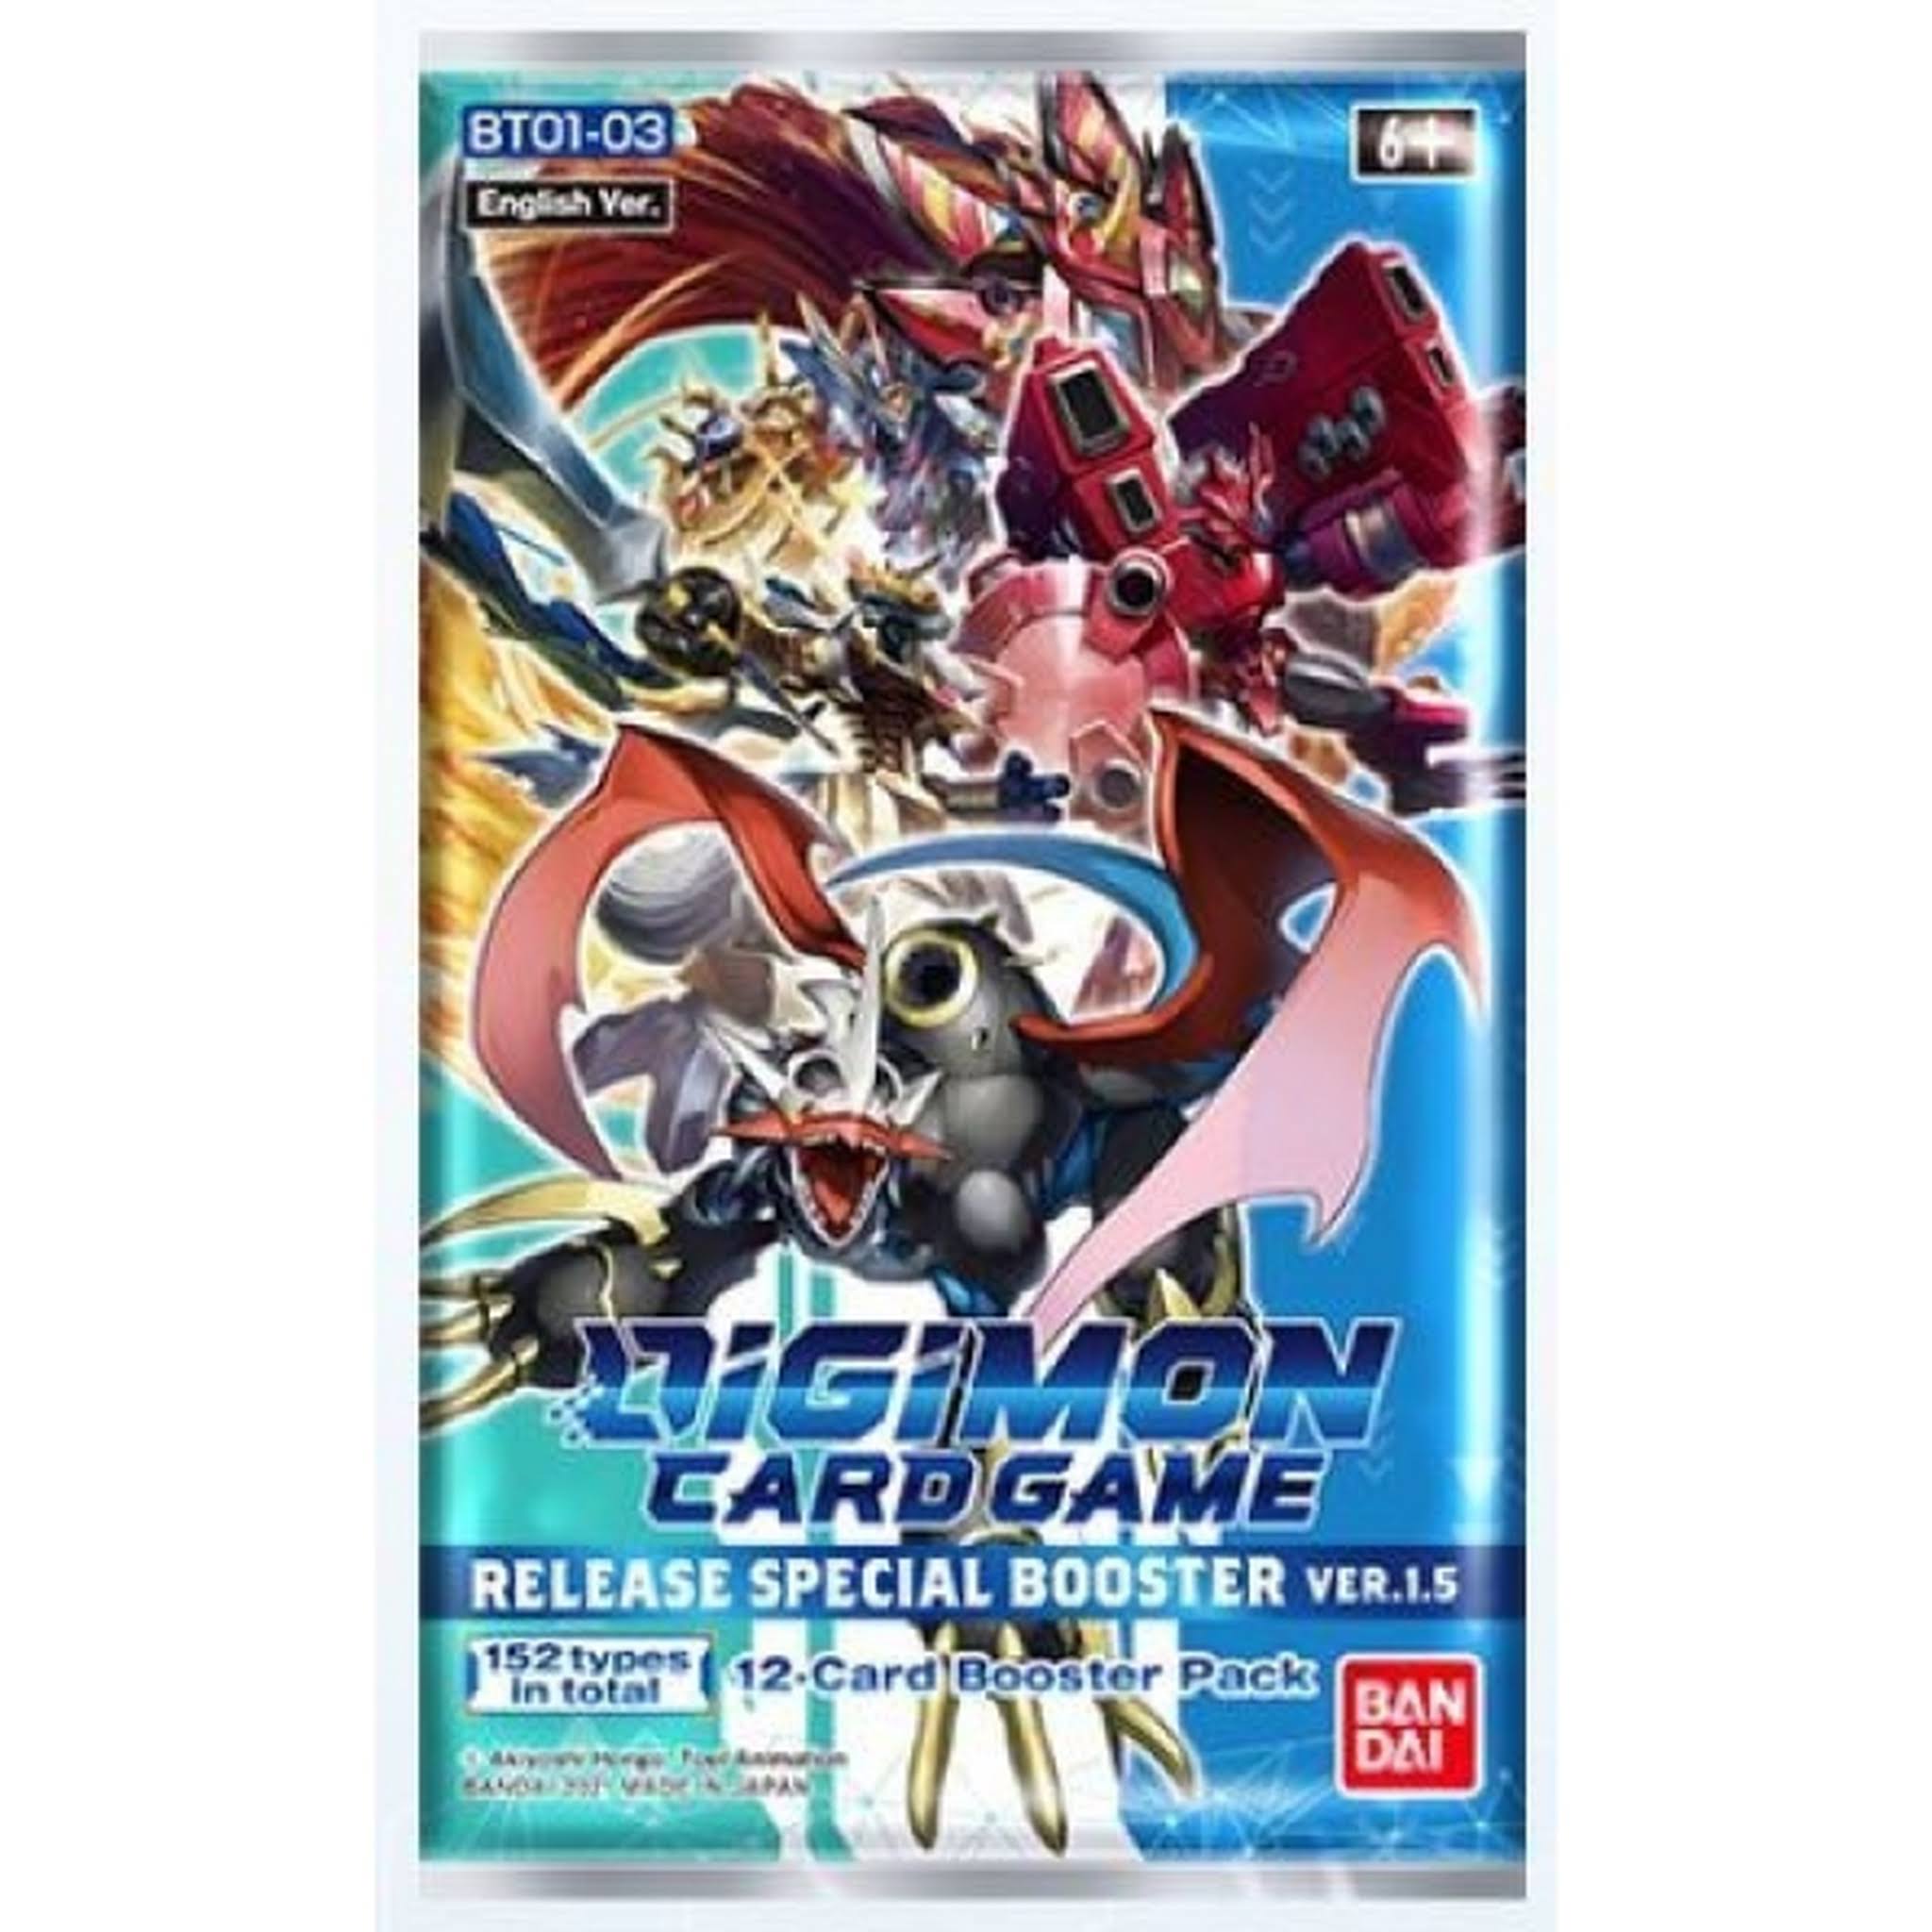 Digimon Card Game - Ver.1.5 BT01-03 - Release Special Booster Pack